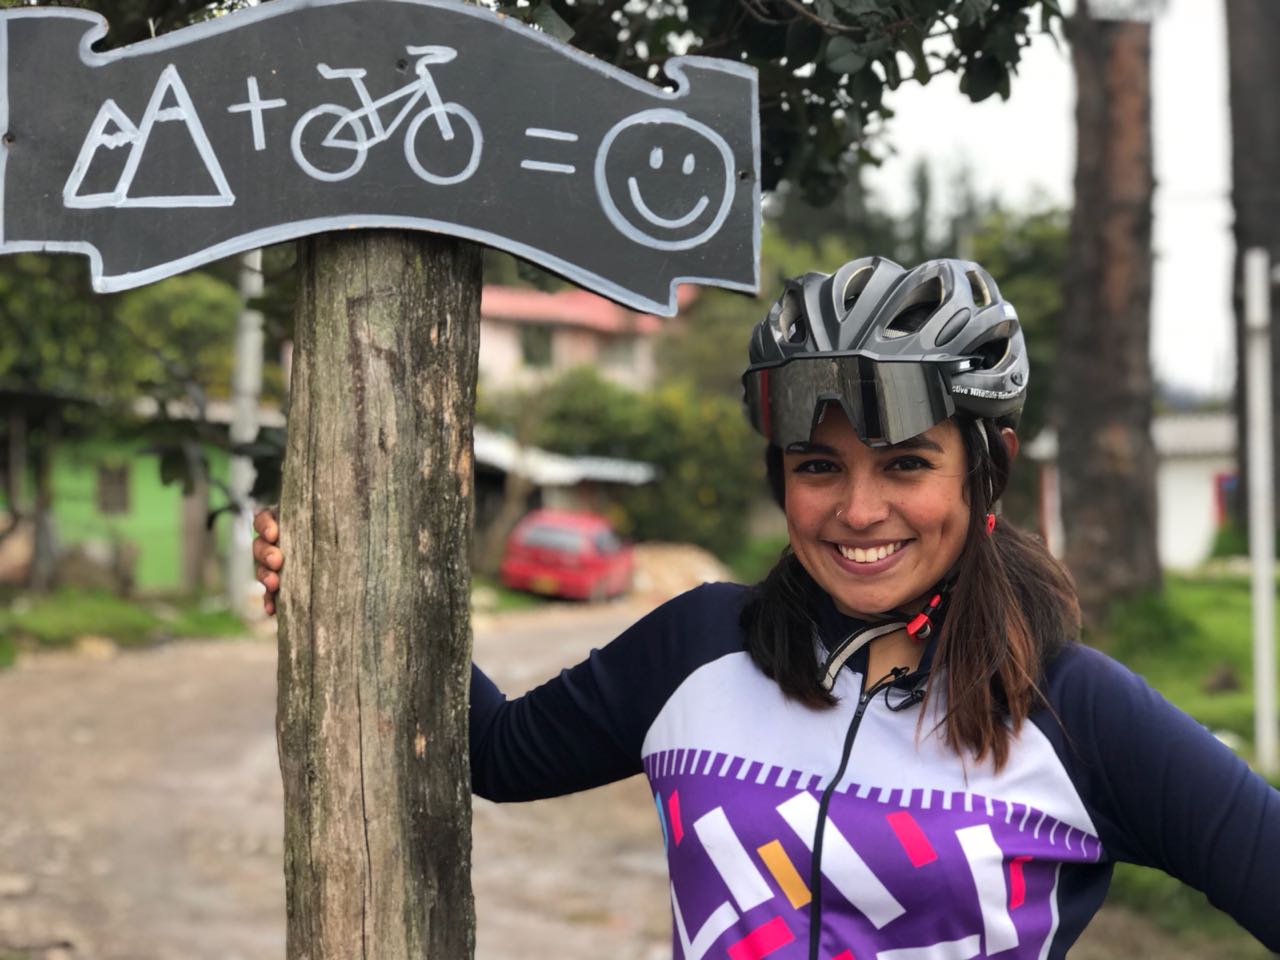 Latin American female in cycling outfit next to a sign that shows a mountain, bicycle and smiley face